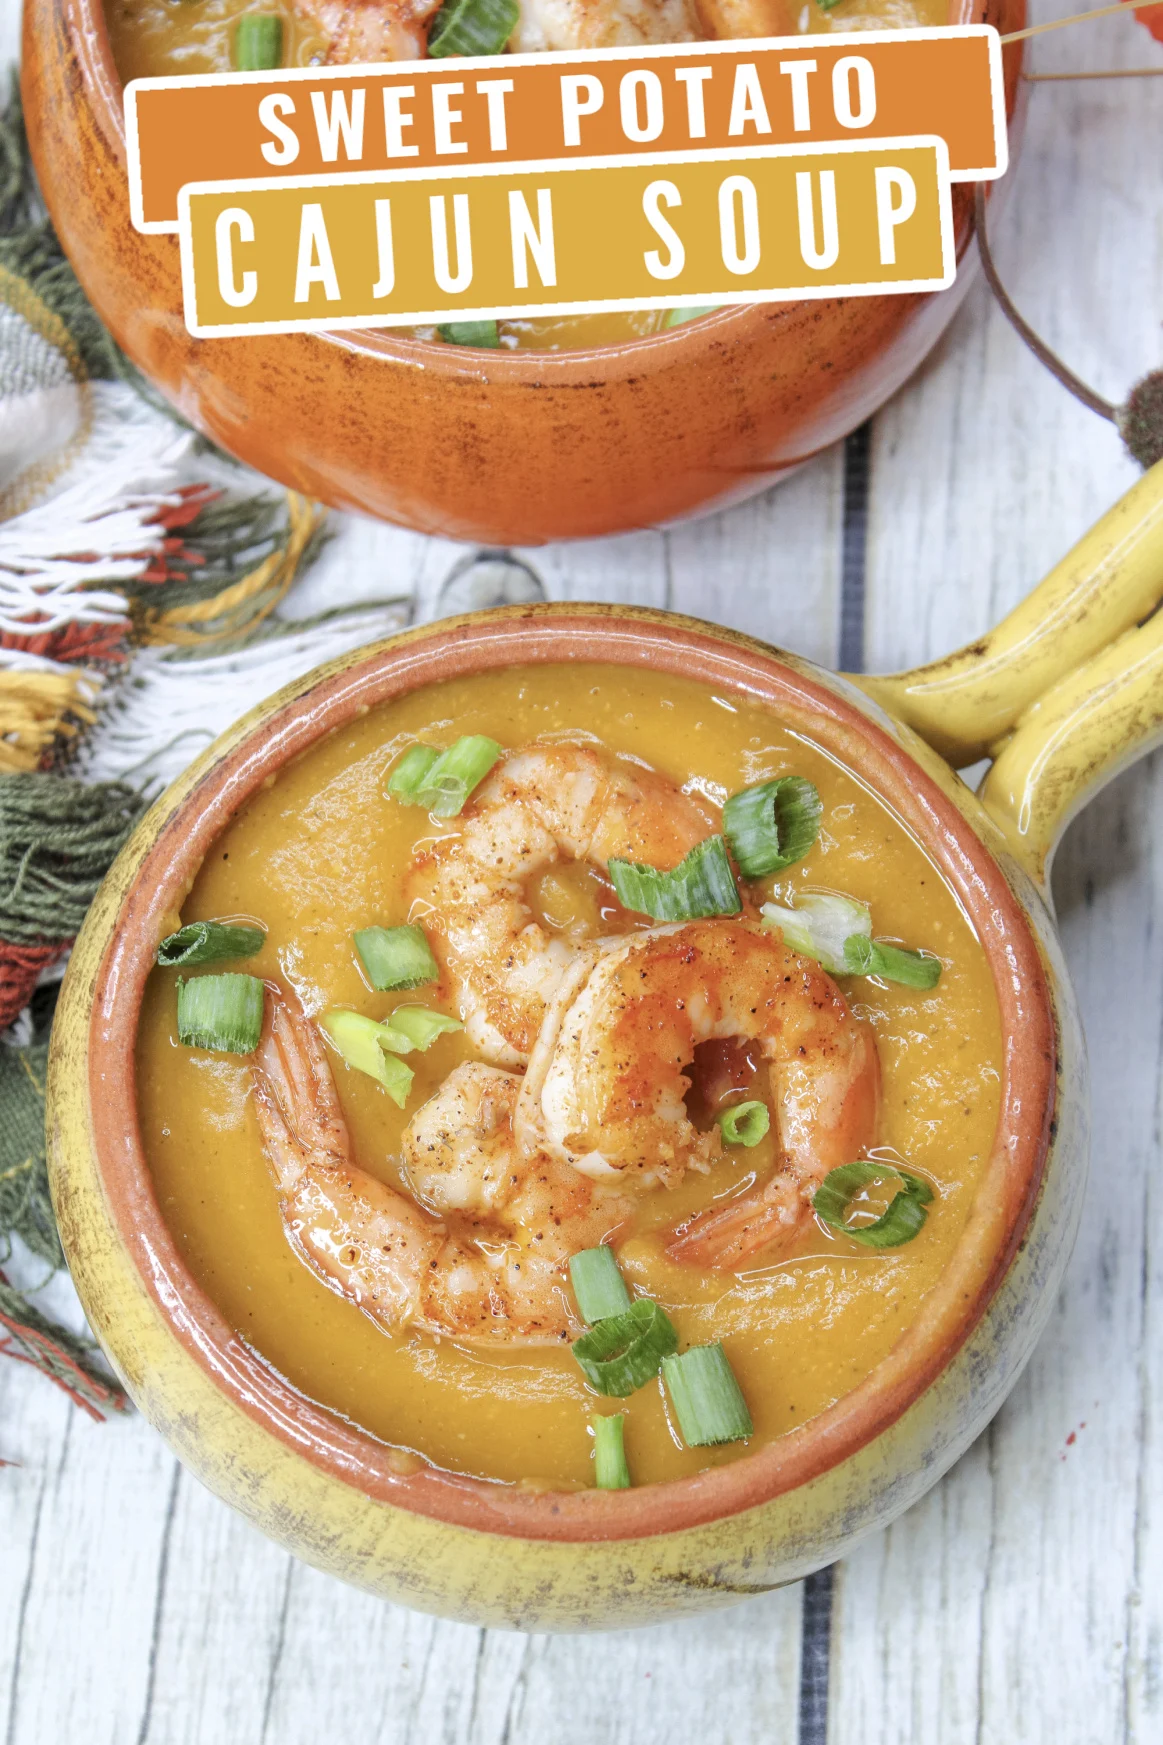 This tasty Cajun sweet potato soup recipe is a bowl of comforting goodness! It's the perfect mix of sweet and spicy that will hit the spot.